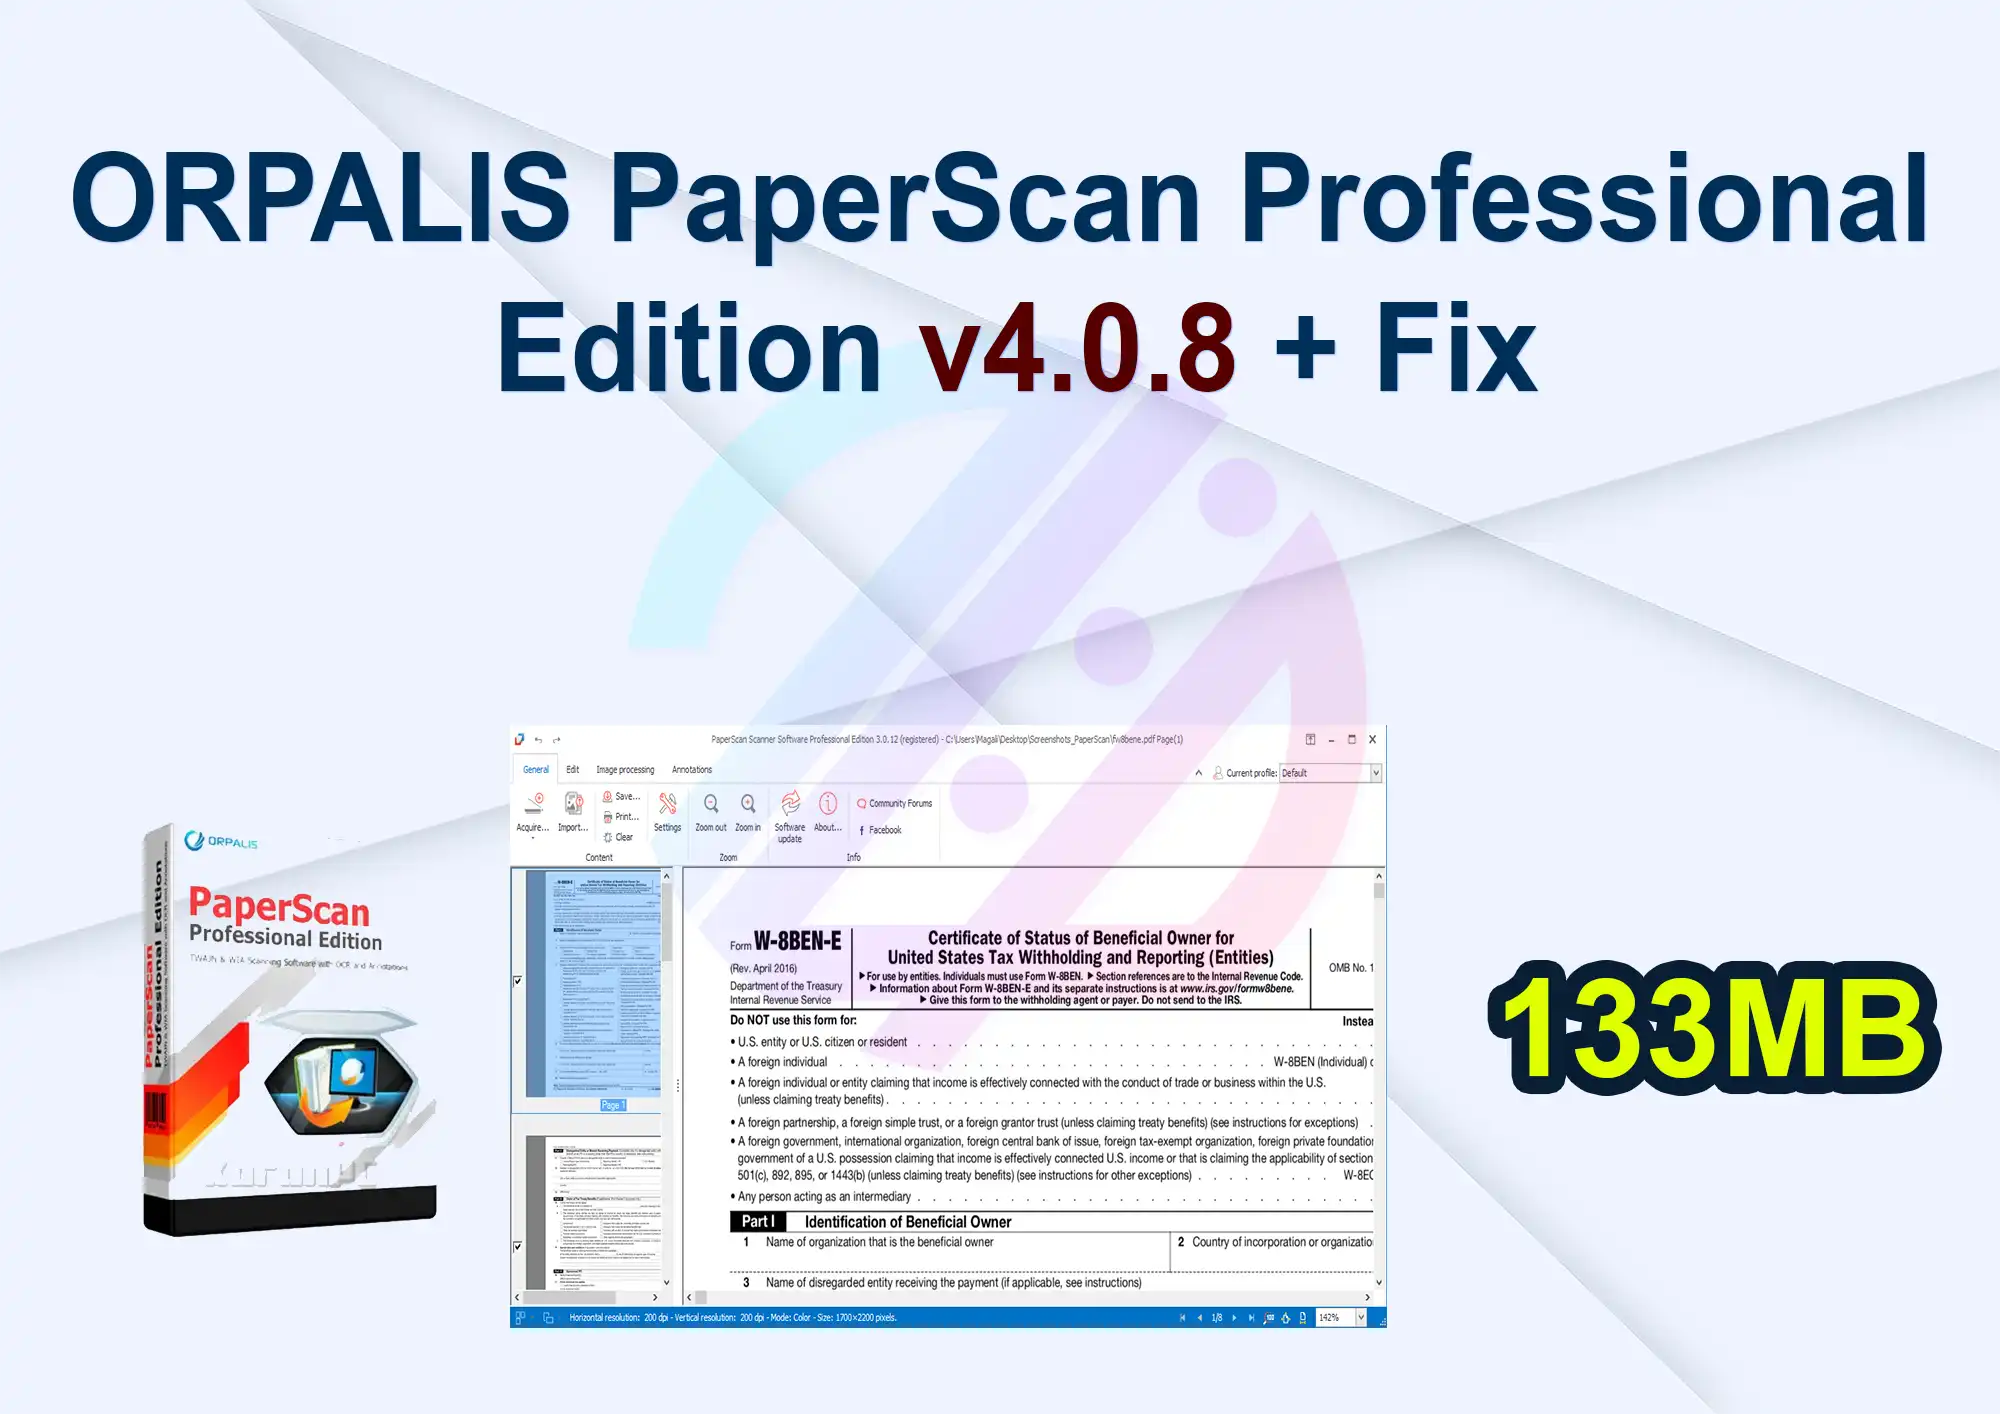 ORPALIS PaperScan Professional Edition v4.0.8 + Fix